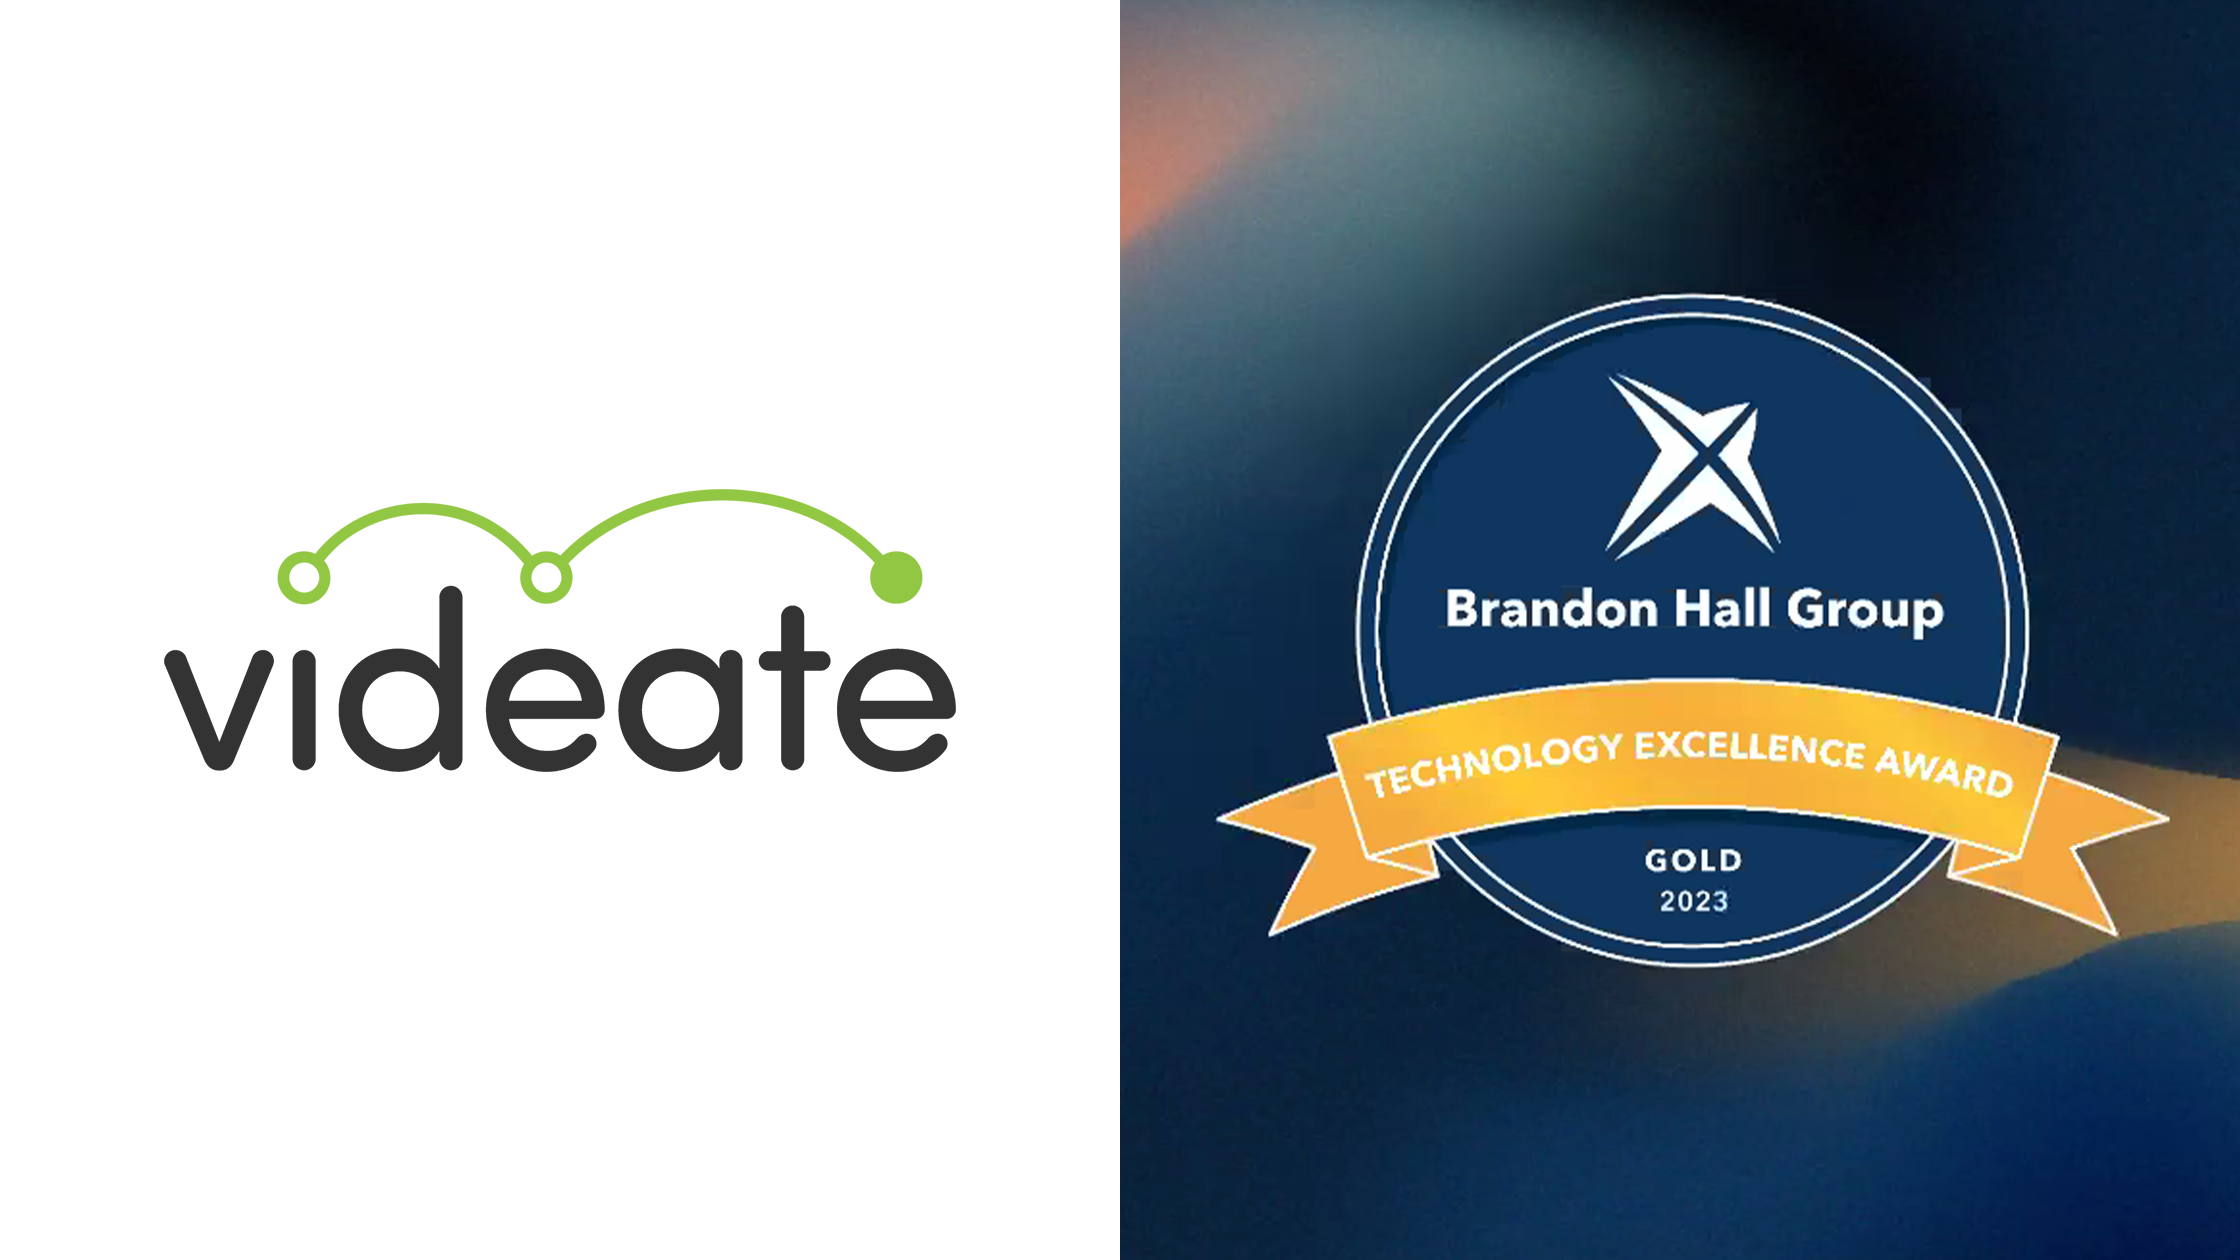 Videate wins Gold in Brandon Hall Group’s  Excellence in Technology Awards. 